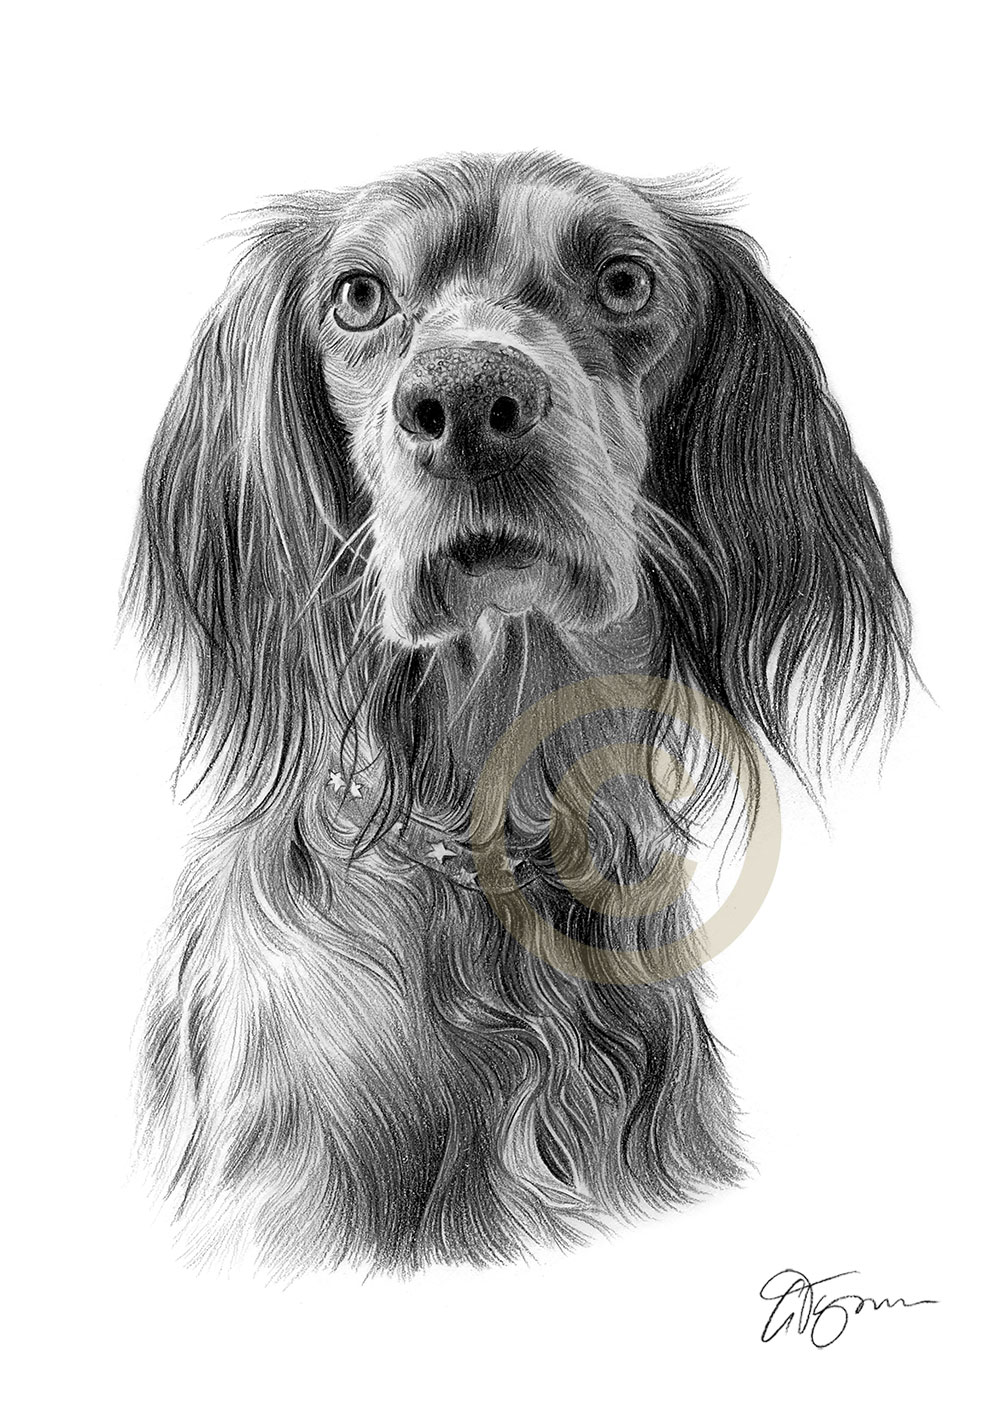 Pencil drawing commission of a dog called Cookie by artist Gary Tymon